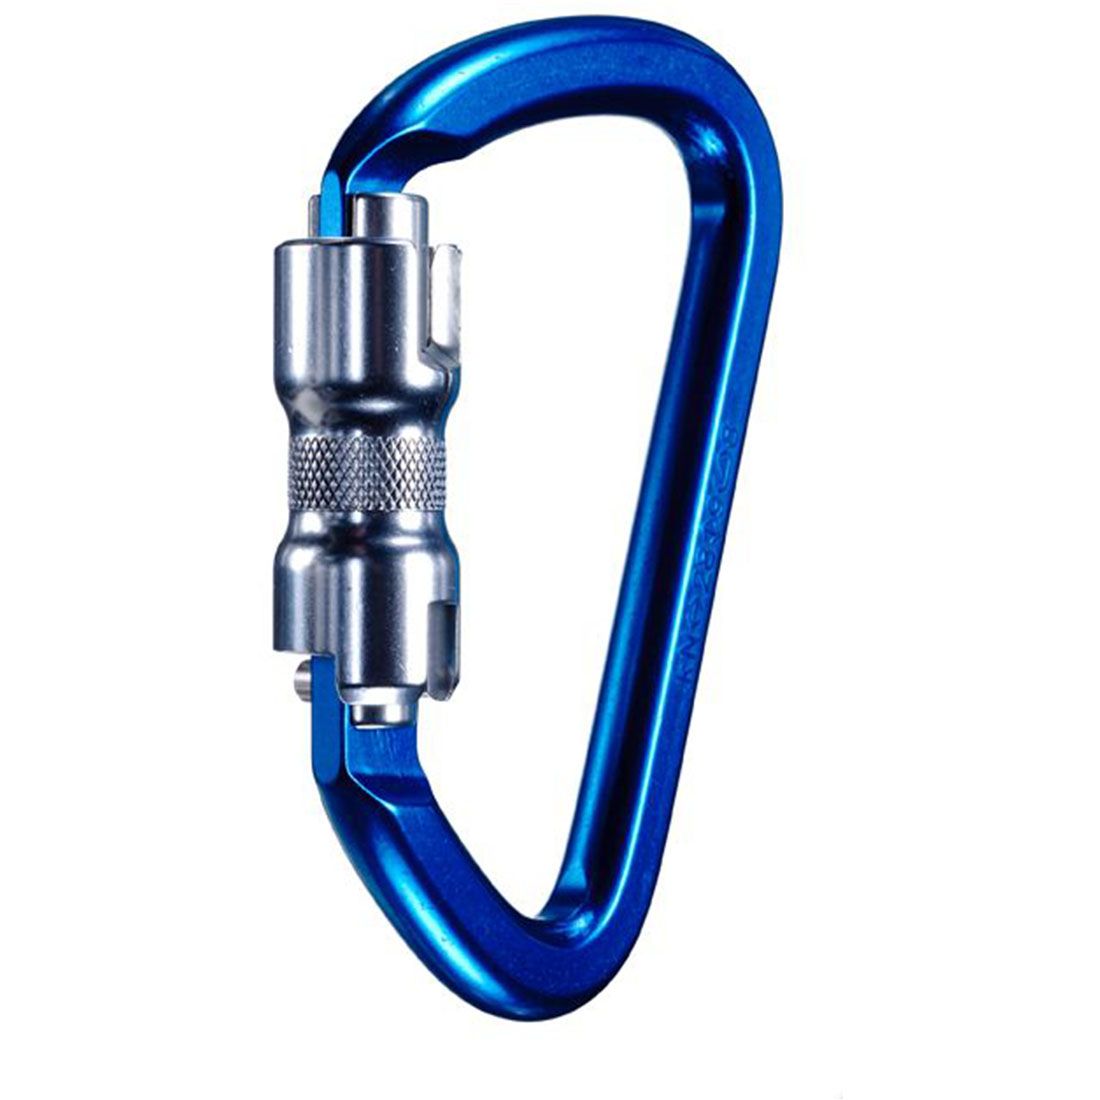 70% OFF RETAIL 5000 lb Steel locking Carabiner industrial rappel safety anchor 